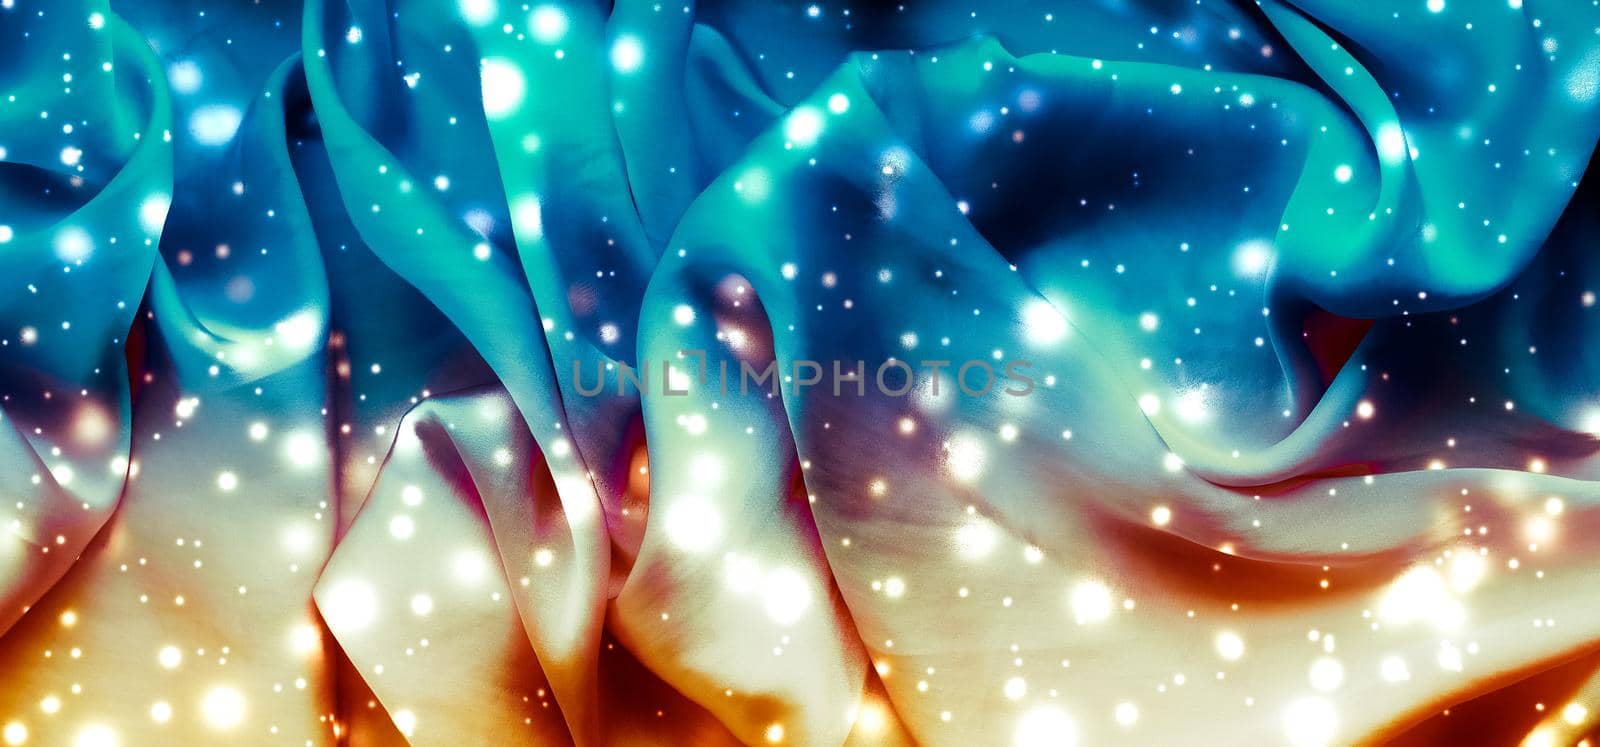 Winter fashion, shiny fabric and glamour style concept - Magic holiday blue and gold soft silk flatlay background texture with glowing snow, luxury beauty abstract backdrop